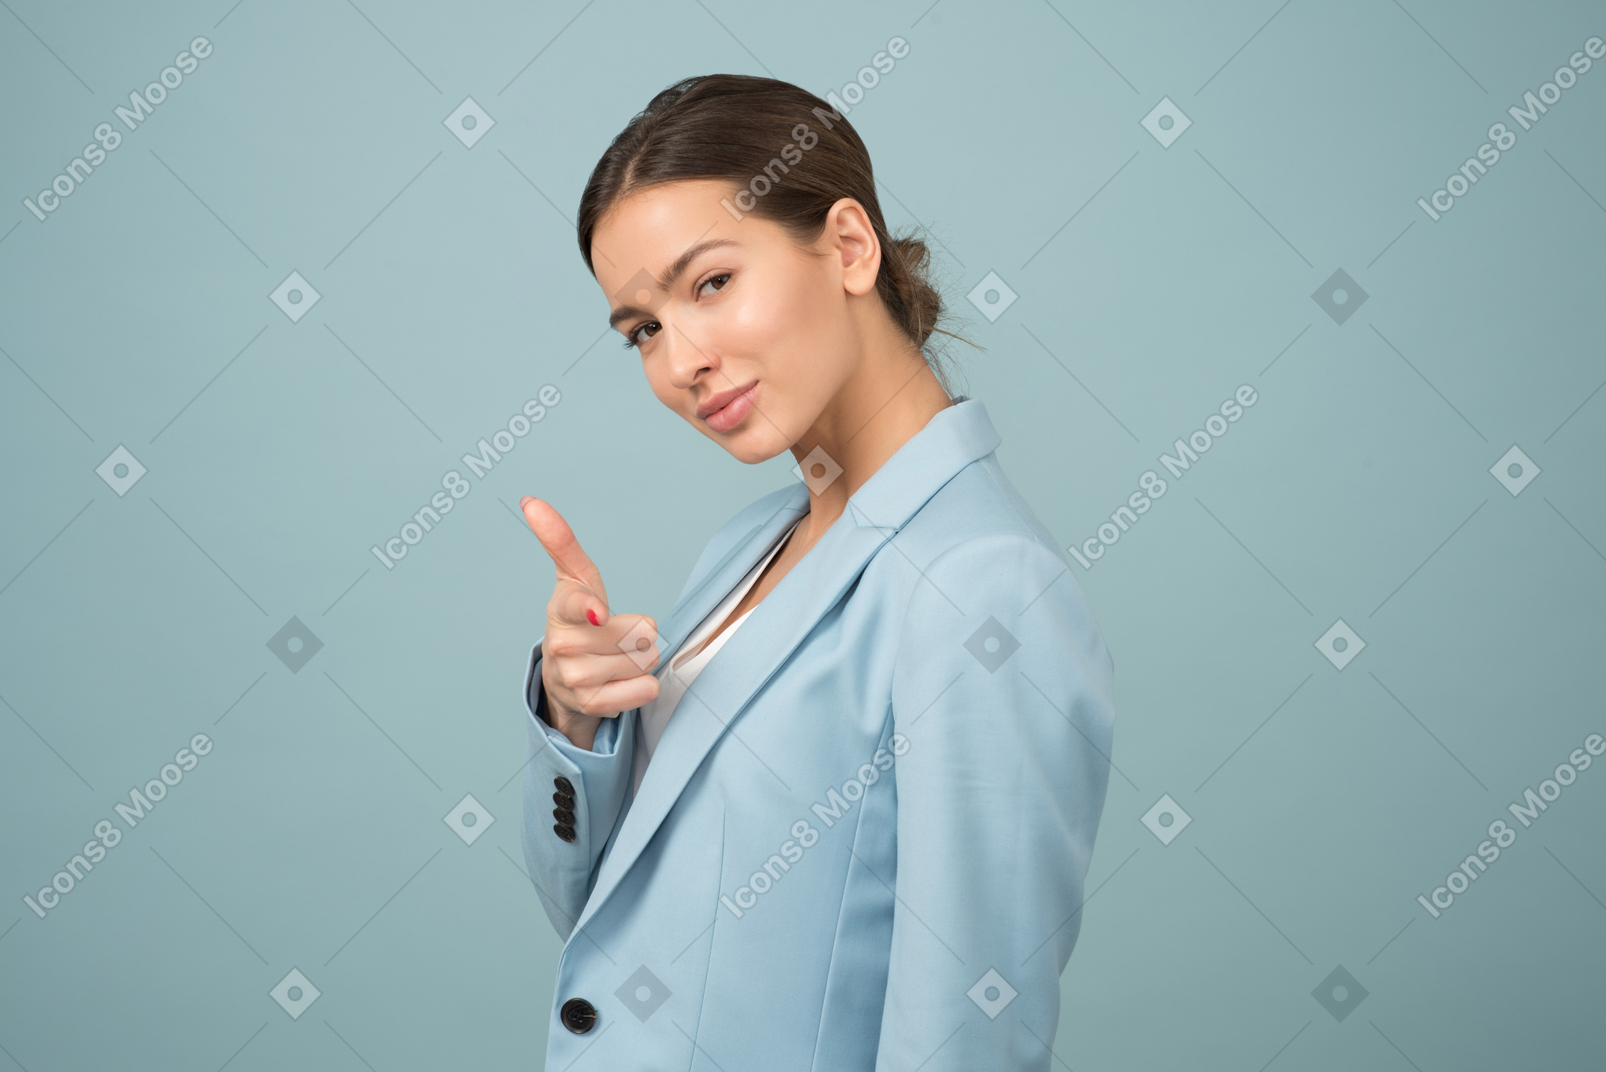 Attractive young woman pointing at you with her index finger